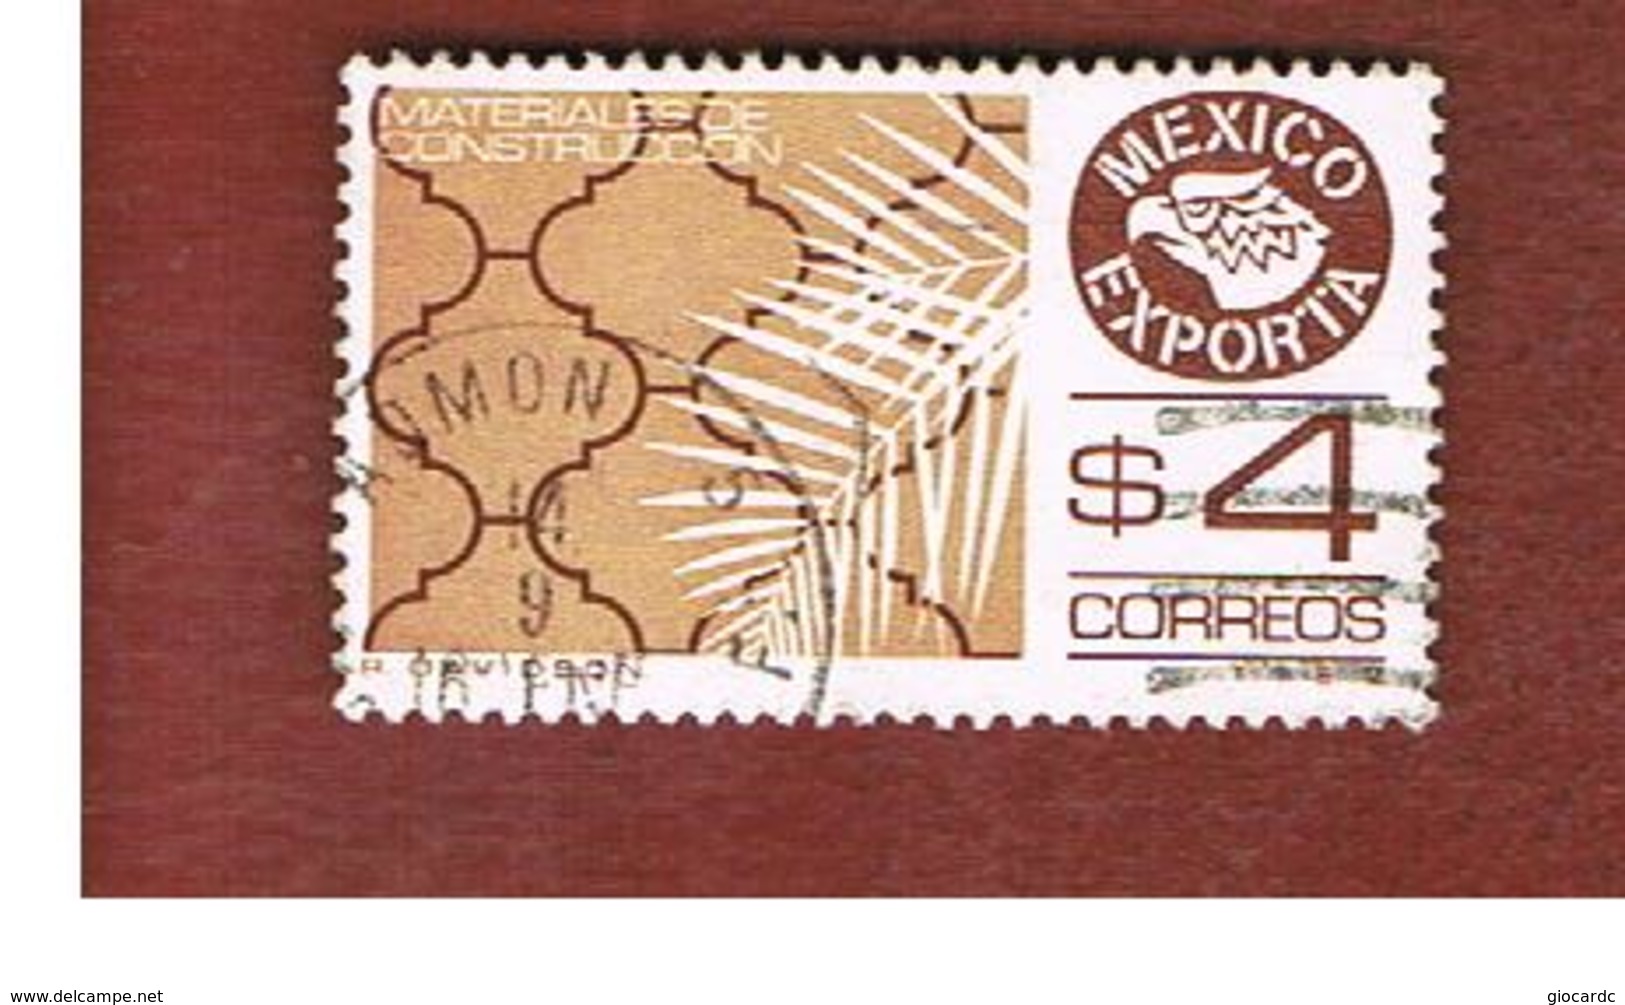 MESSICO (MEXICO) -  SG 1359b   - 1975  MEXICAN EXPORTS: TILES  -  USED° - Messico